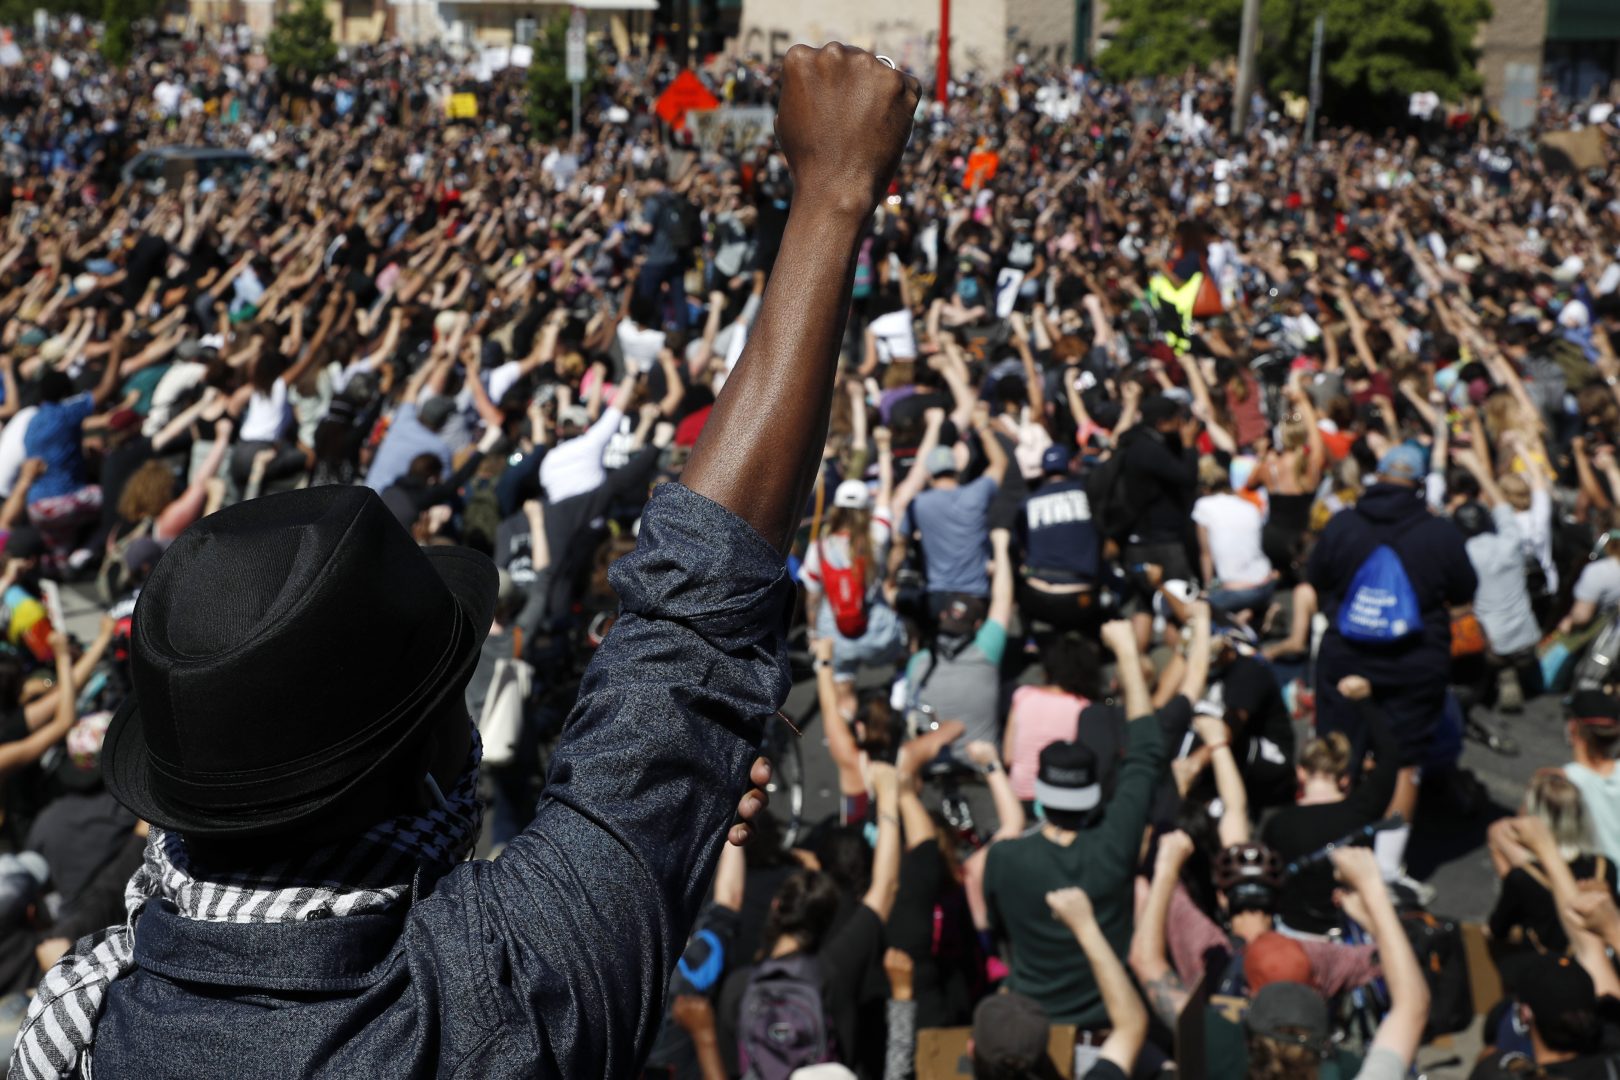 Protesters gather Saturday, May 30, 2020, in Minneapolis. Protests continued following the death of George Floyd, a black man who was killed in police custody in Minneapolis on May 25.  